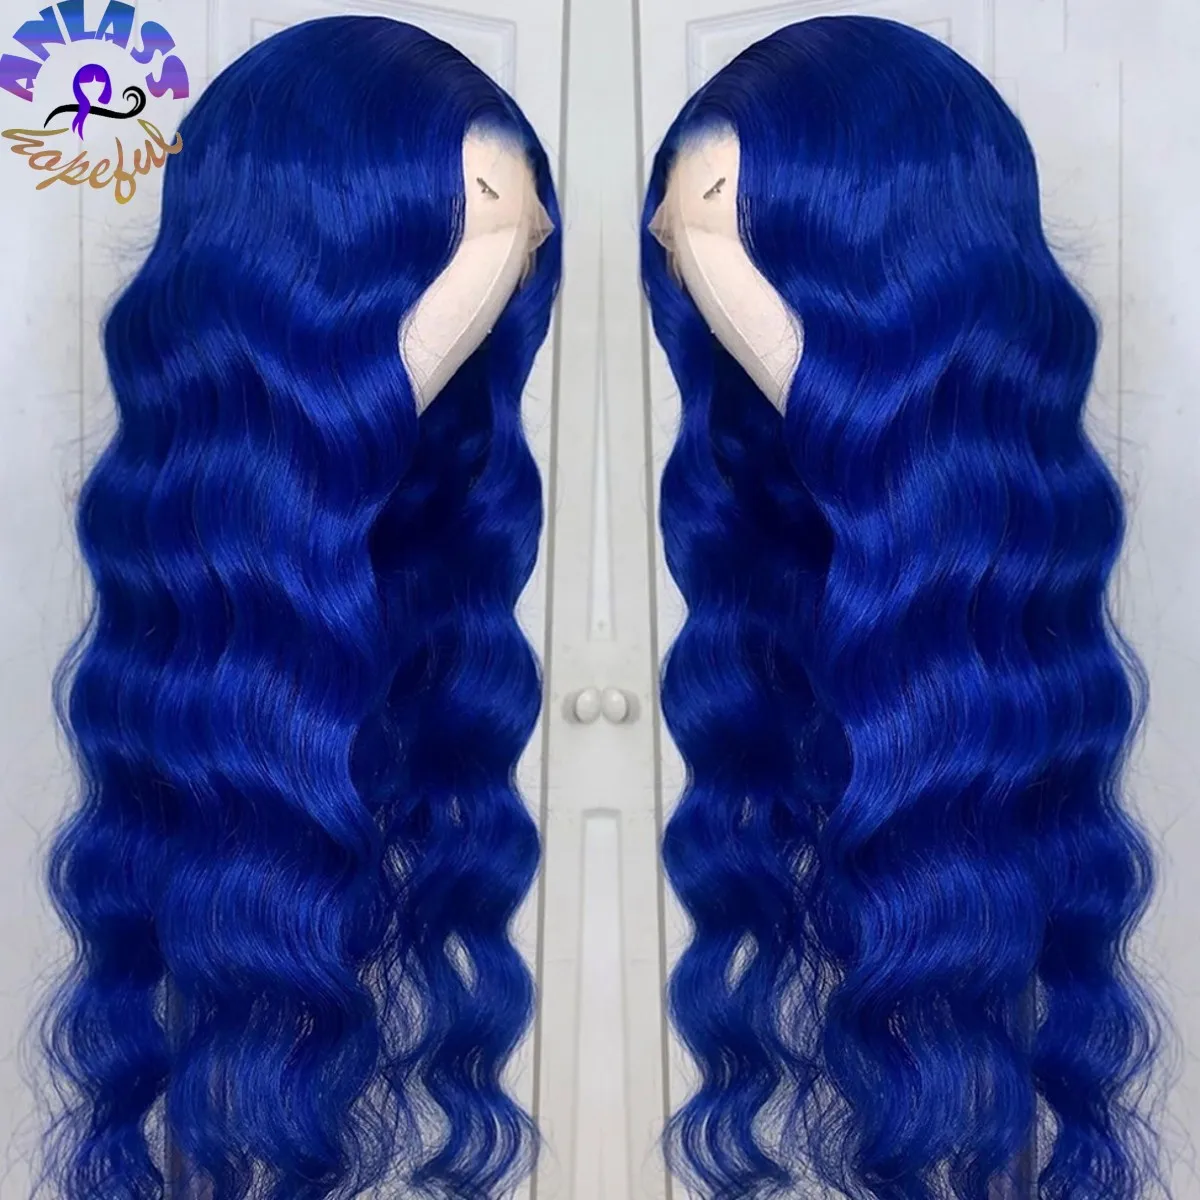 Blue Lace Front Wig Synthetic Hair Long Deep Water Wave  Burgundy Red /Orange Colored Wig  Soft Hair Glueless Cosplay  Wig